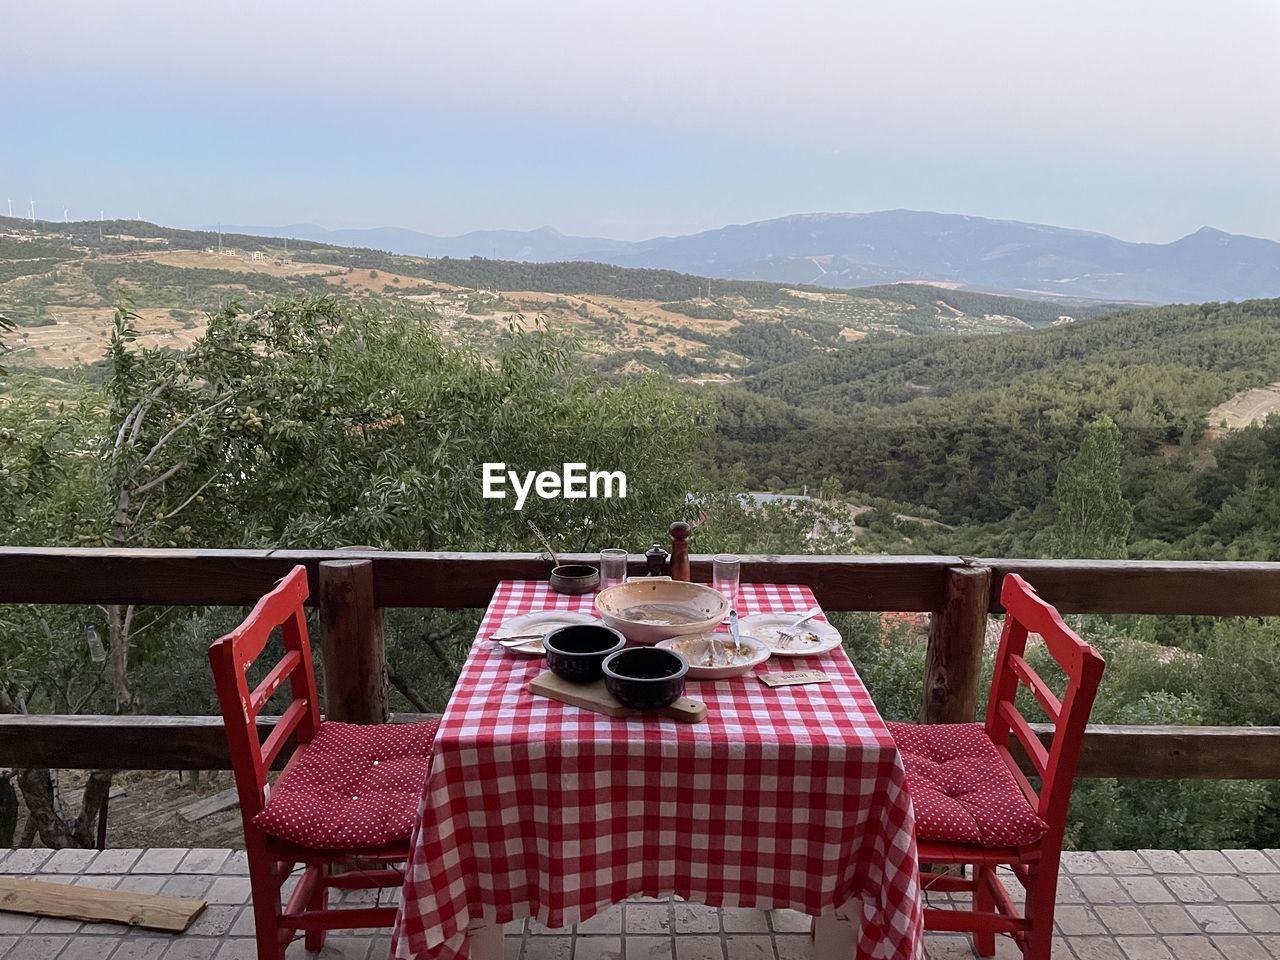 table, seat, mountain, chair, nature, scenics - nature, no people, food and drink, landscape, beauty in nature, plant, tranquility, mountain range, sky, absence, tranquil scene, tablecloth, tree, furniture, idyllic, land, outdoors, relaxation, day, travel destinations, food, balcony, drink, architecture, summer, wood, environment, setting, empty, non-urban scene, holiday, red, vacation, travel, checked pattern, trip, railing, clear sky, patio